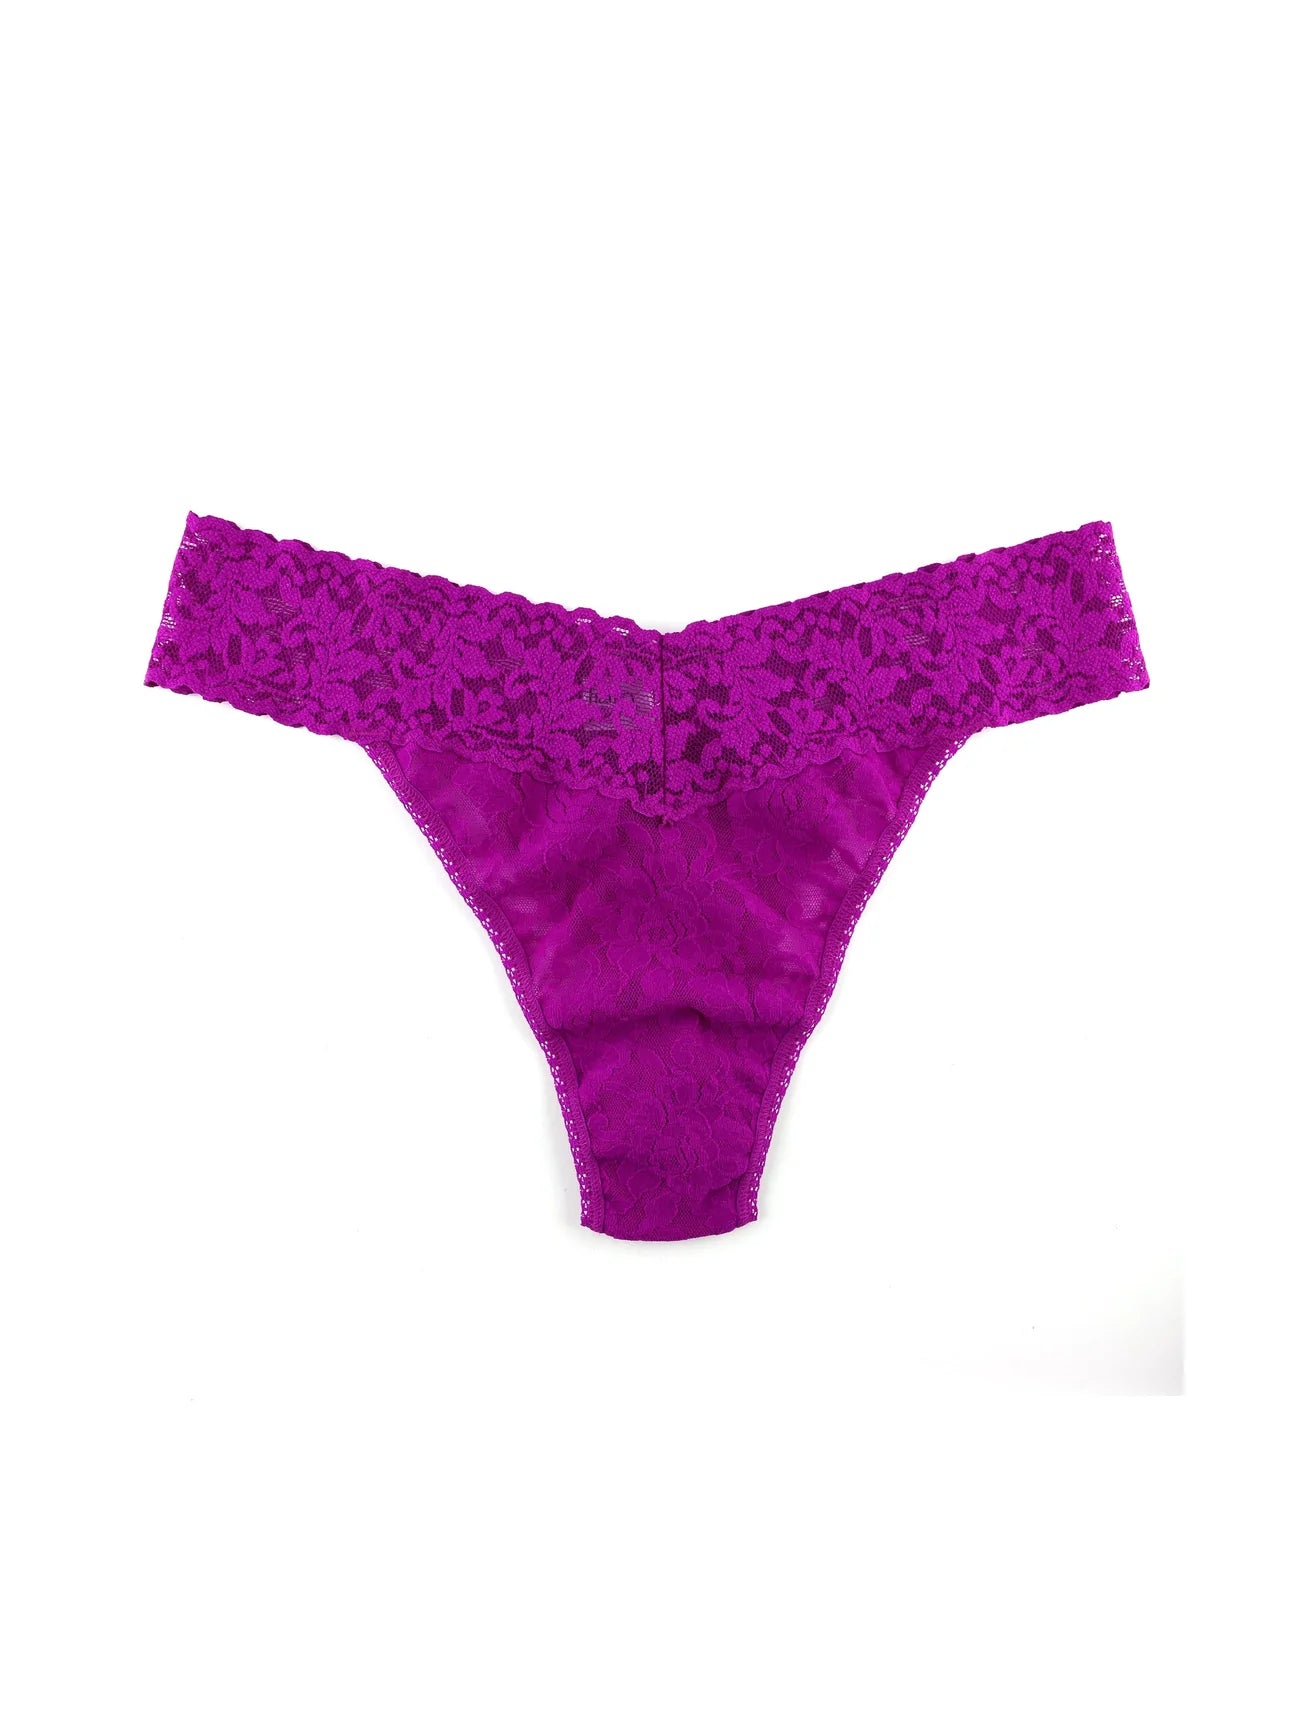 Buy countess-pink Hanky Panky Signature Lace Original Rise Thong-Packaged 4811p